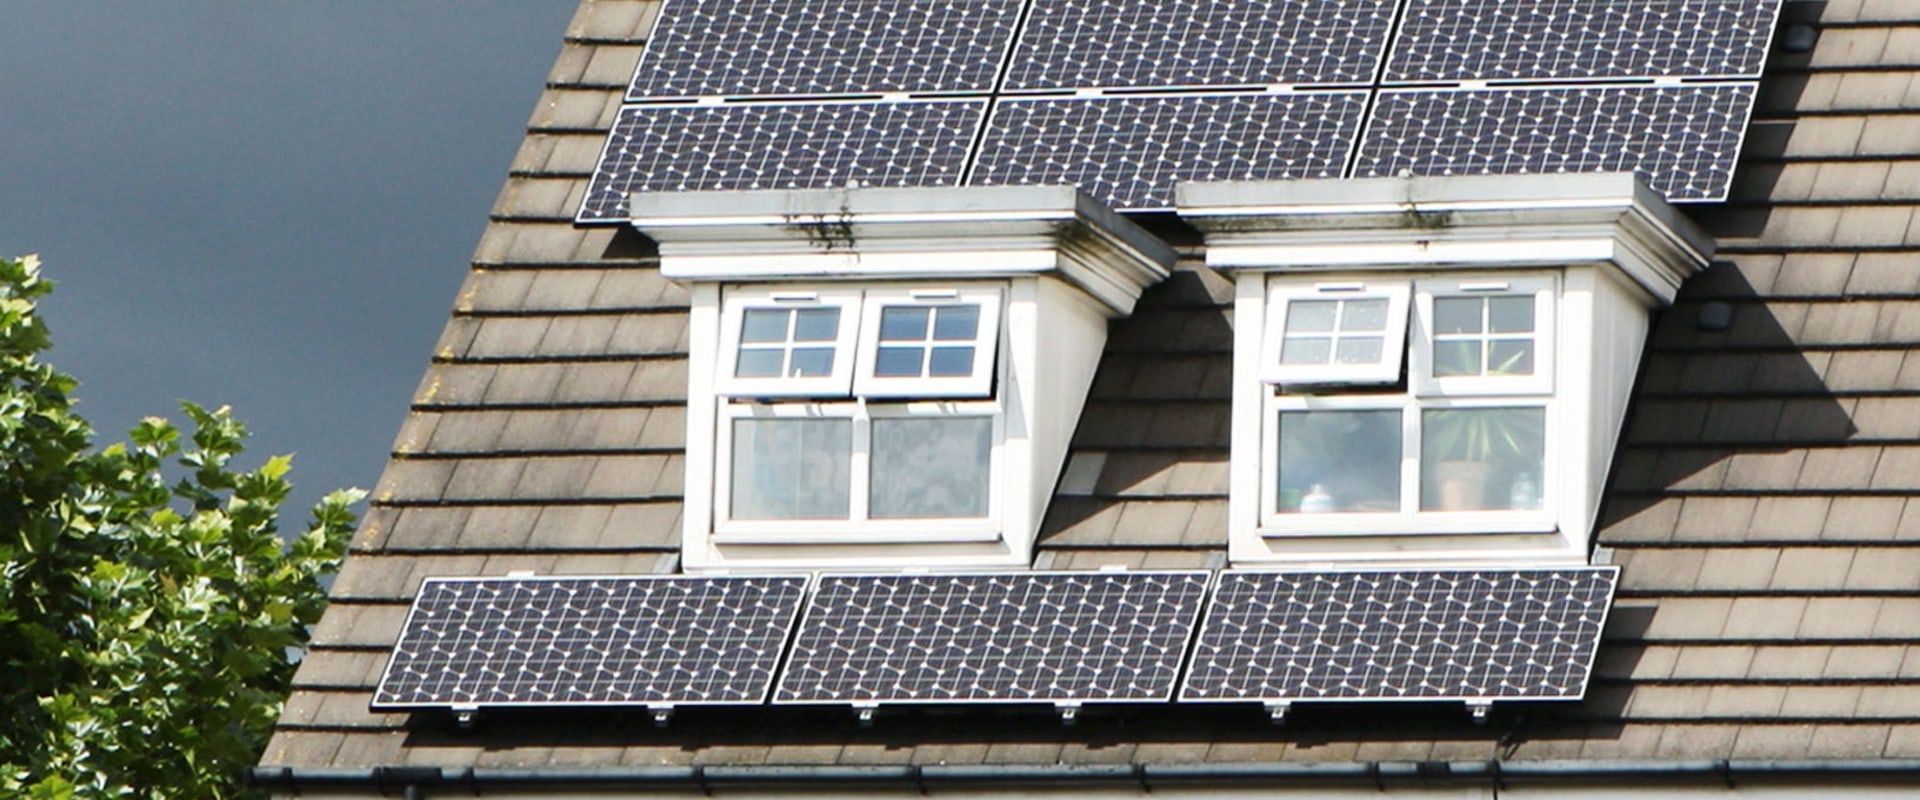 The Pros and Cons of Solar Energy: Is it Worth it?